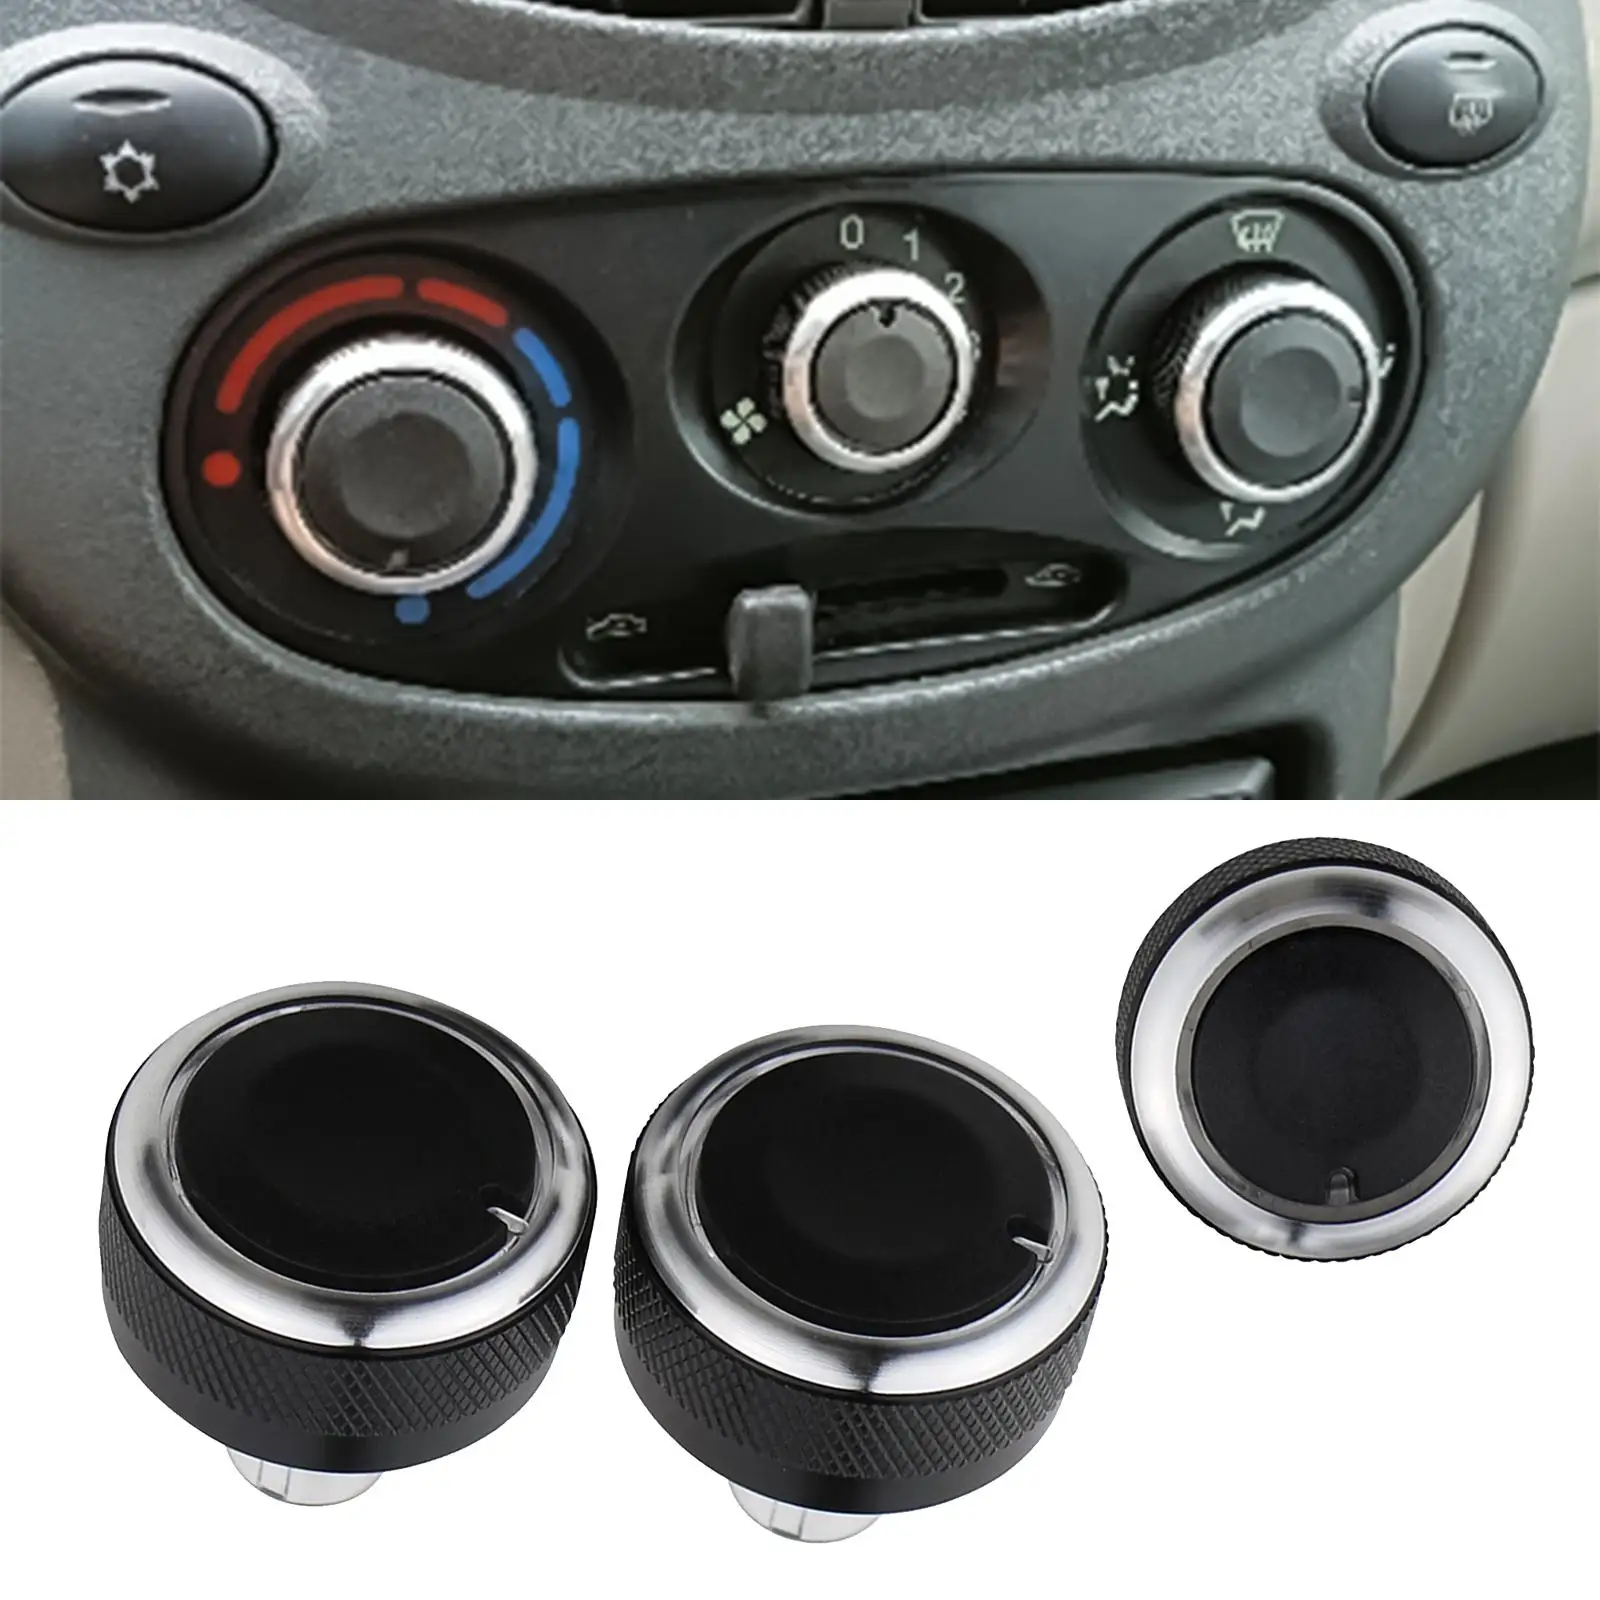 3 Pieces Car Air Conditioner Knob Replacement Parts A/C Fan Switch Knob Professional Air Conditioner Switch Knob for Granta